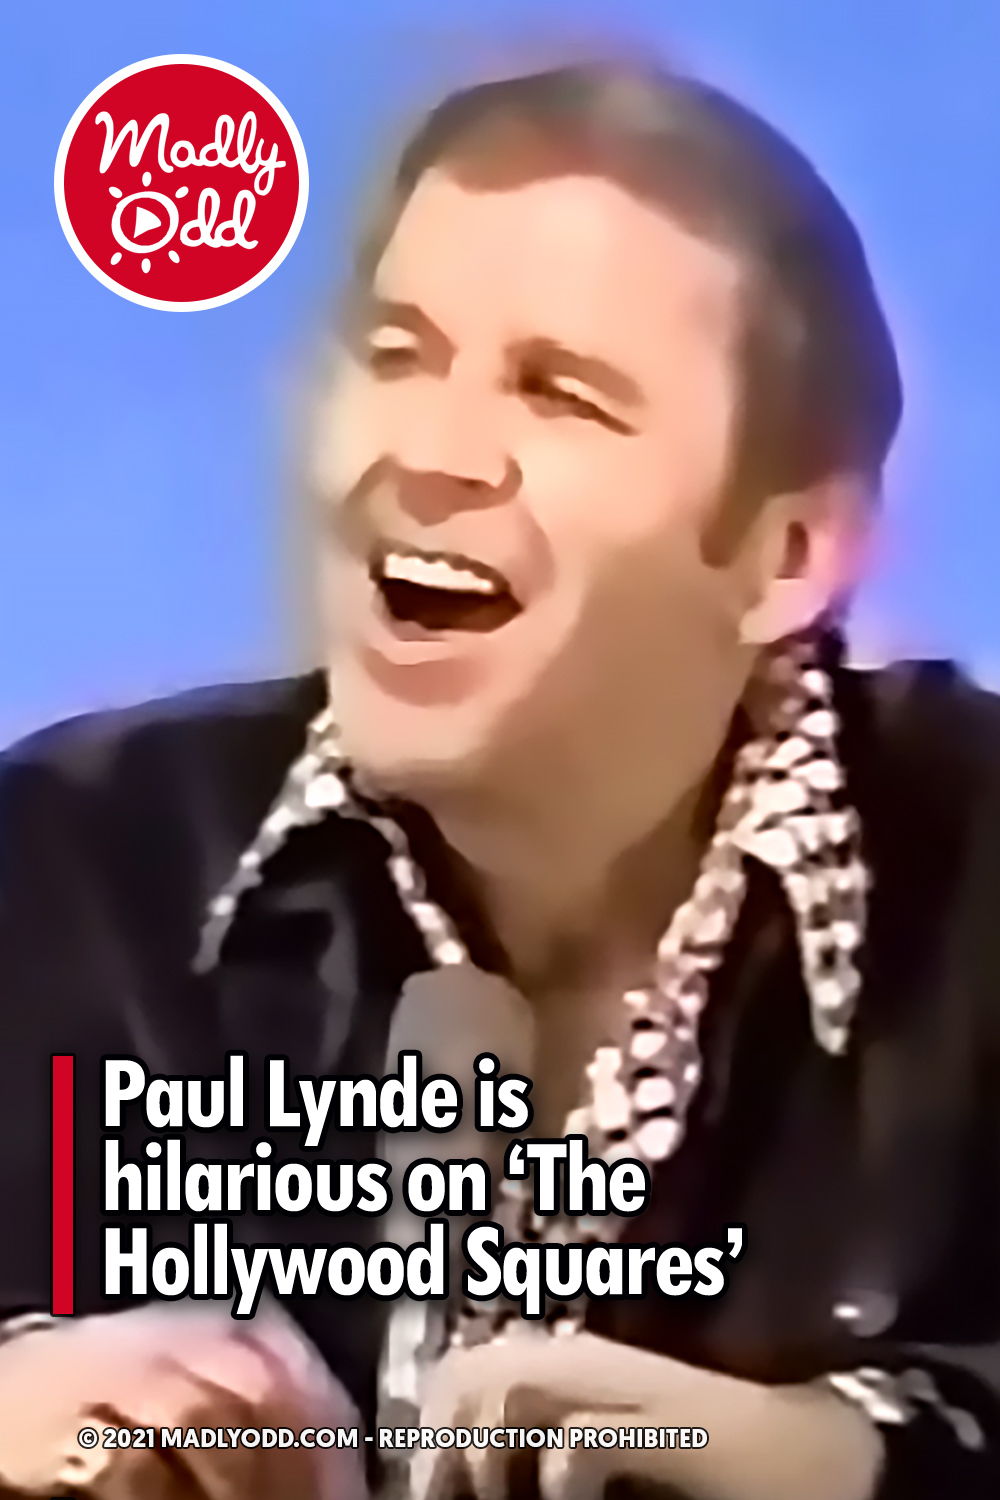 Paul Lynde is hilarious on  ‘The Hollywood Squares’